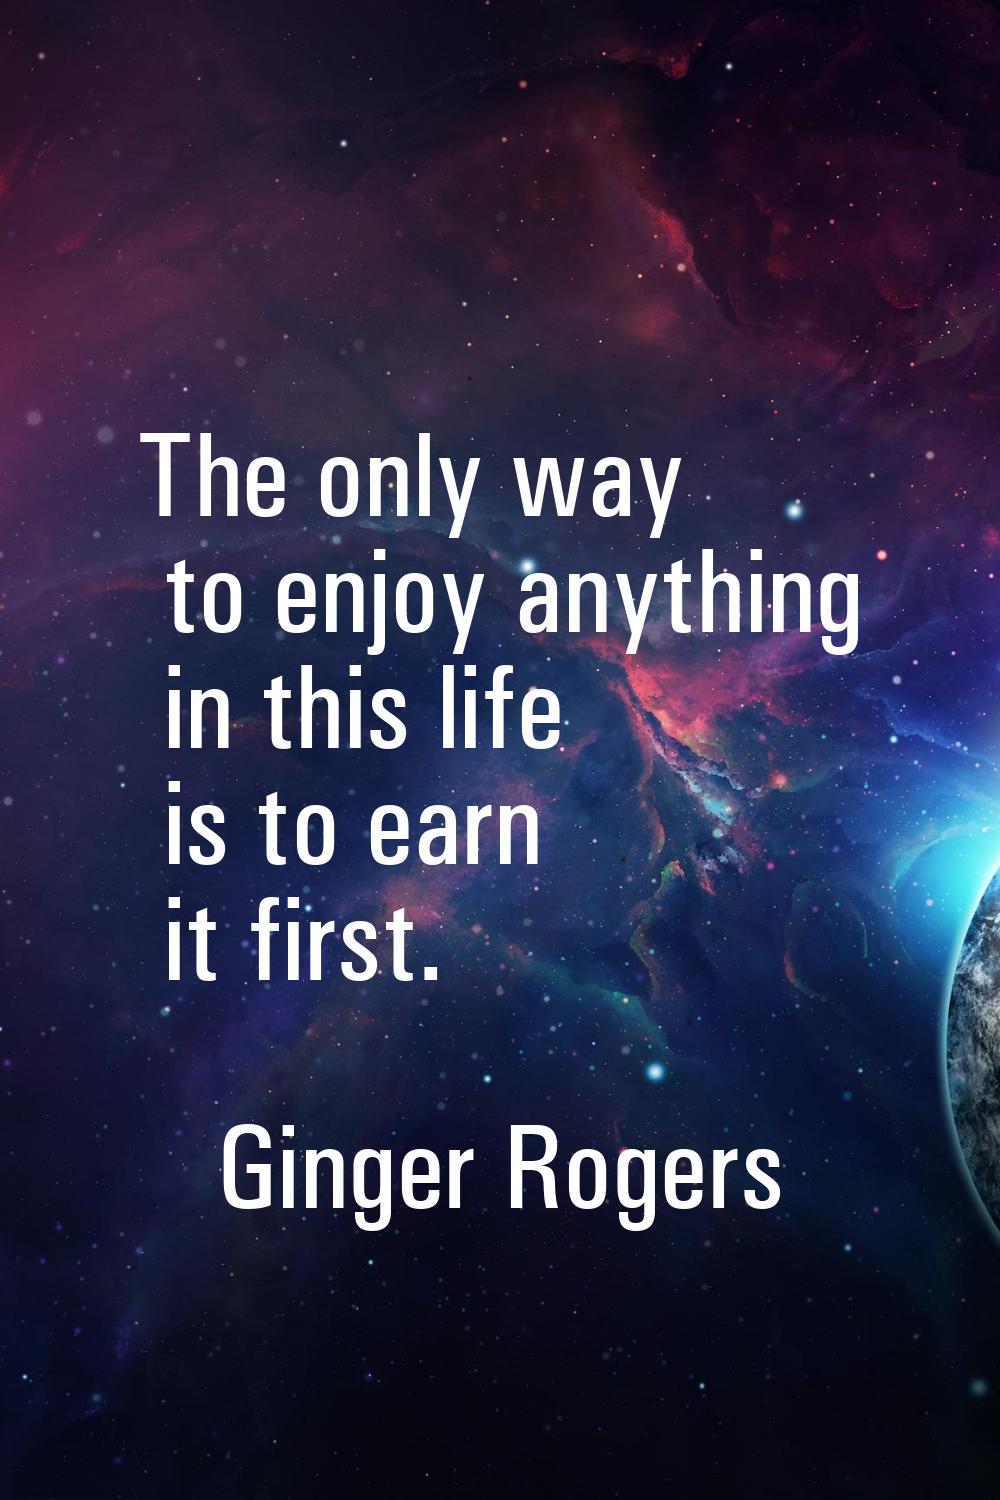 The only way to enjoy anything in this life is to earn it first.